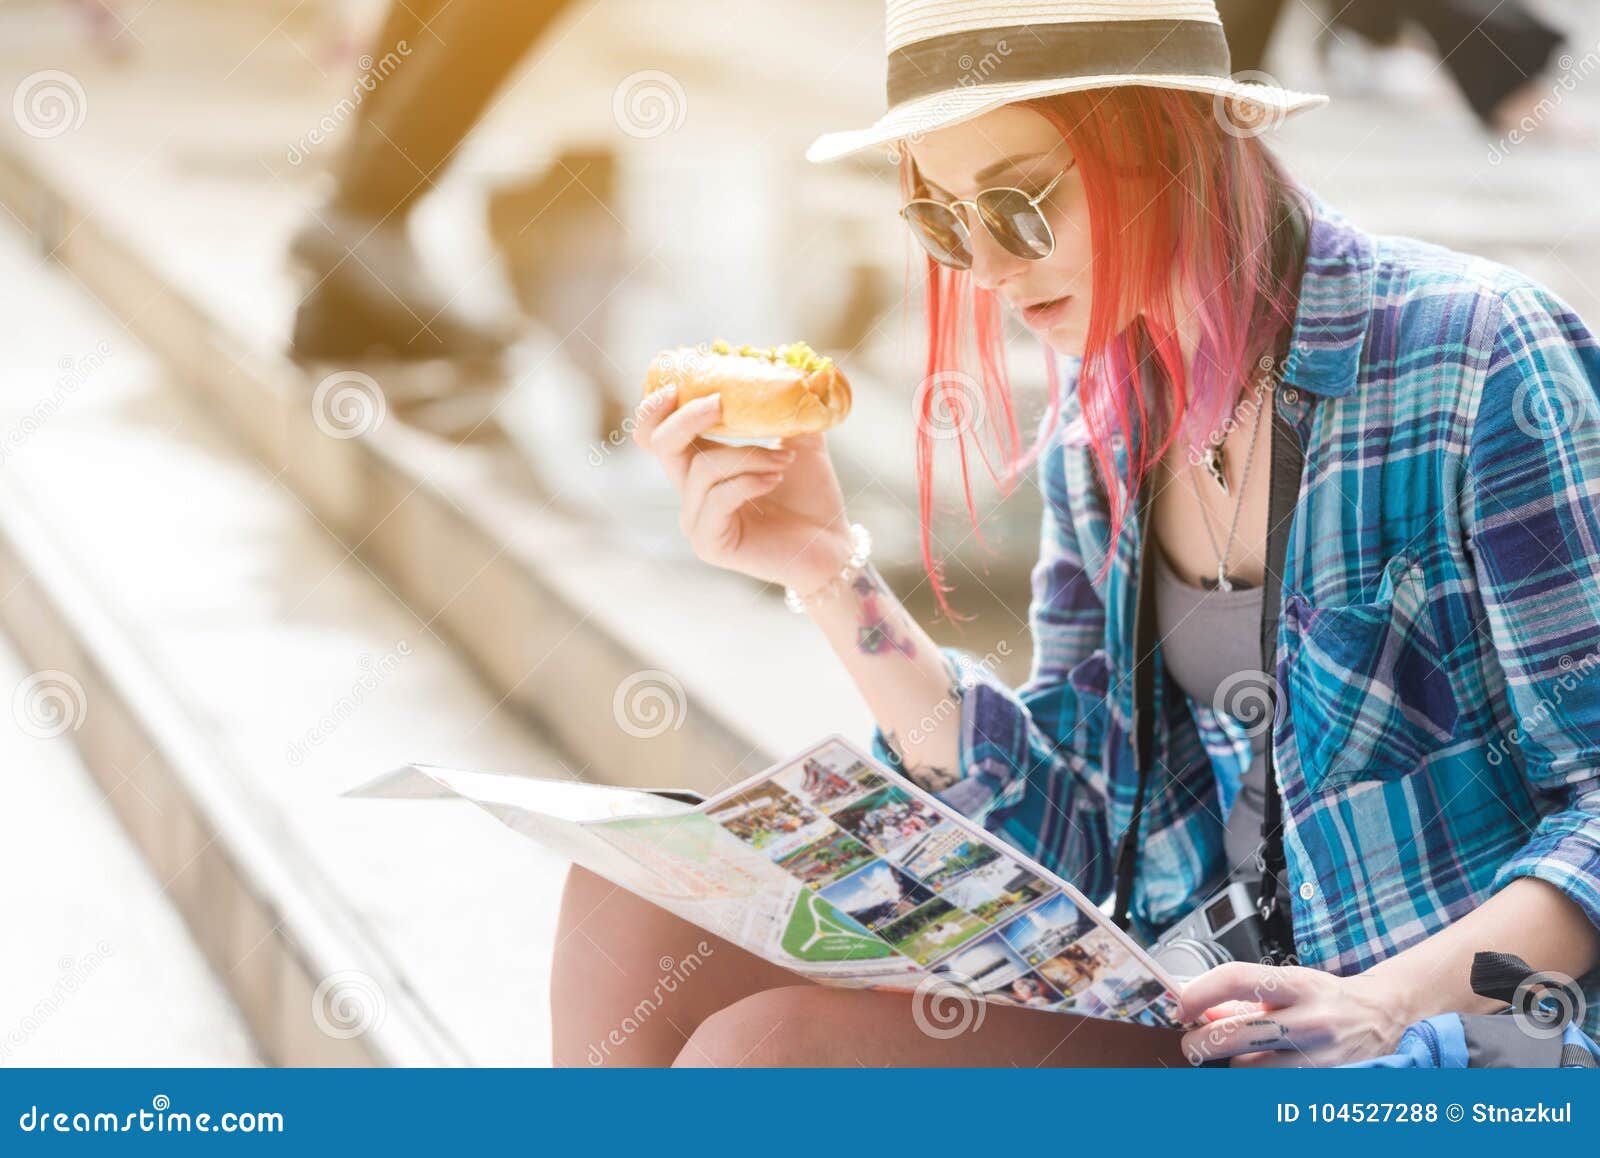 woman westerner looking at map and smartphone during breakfast w